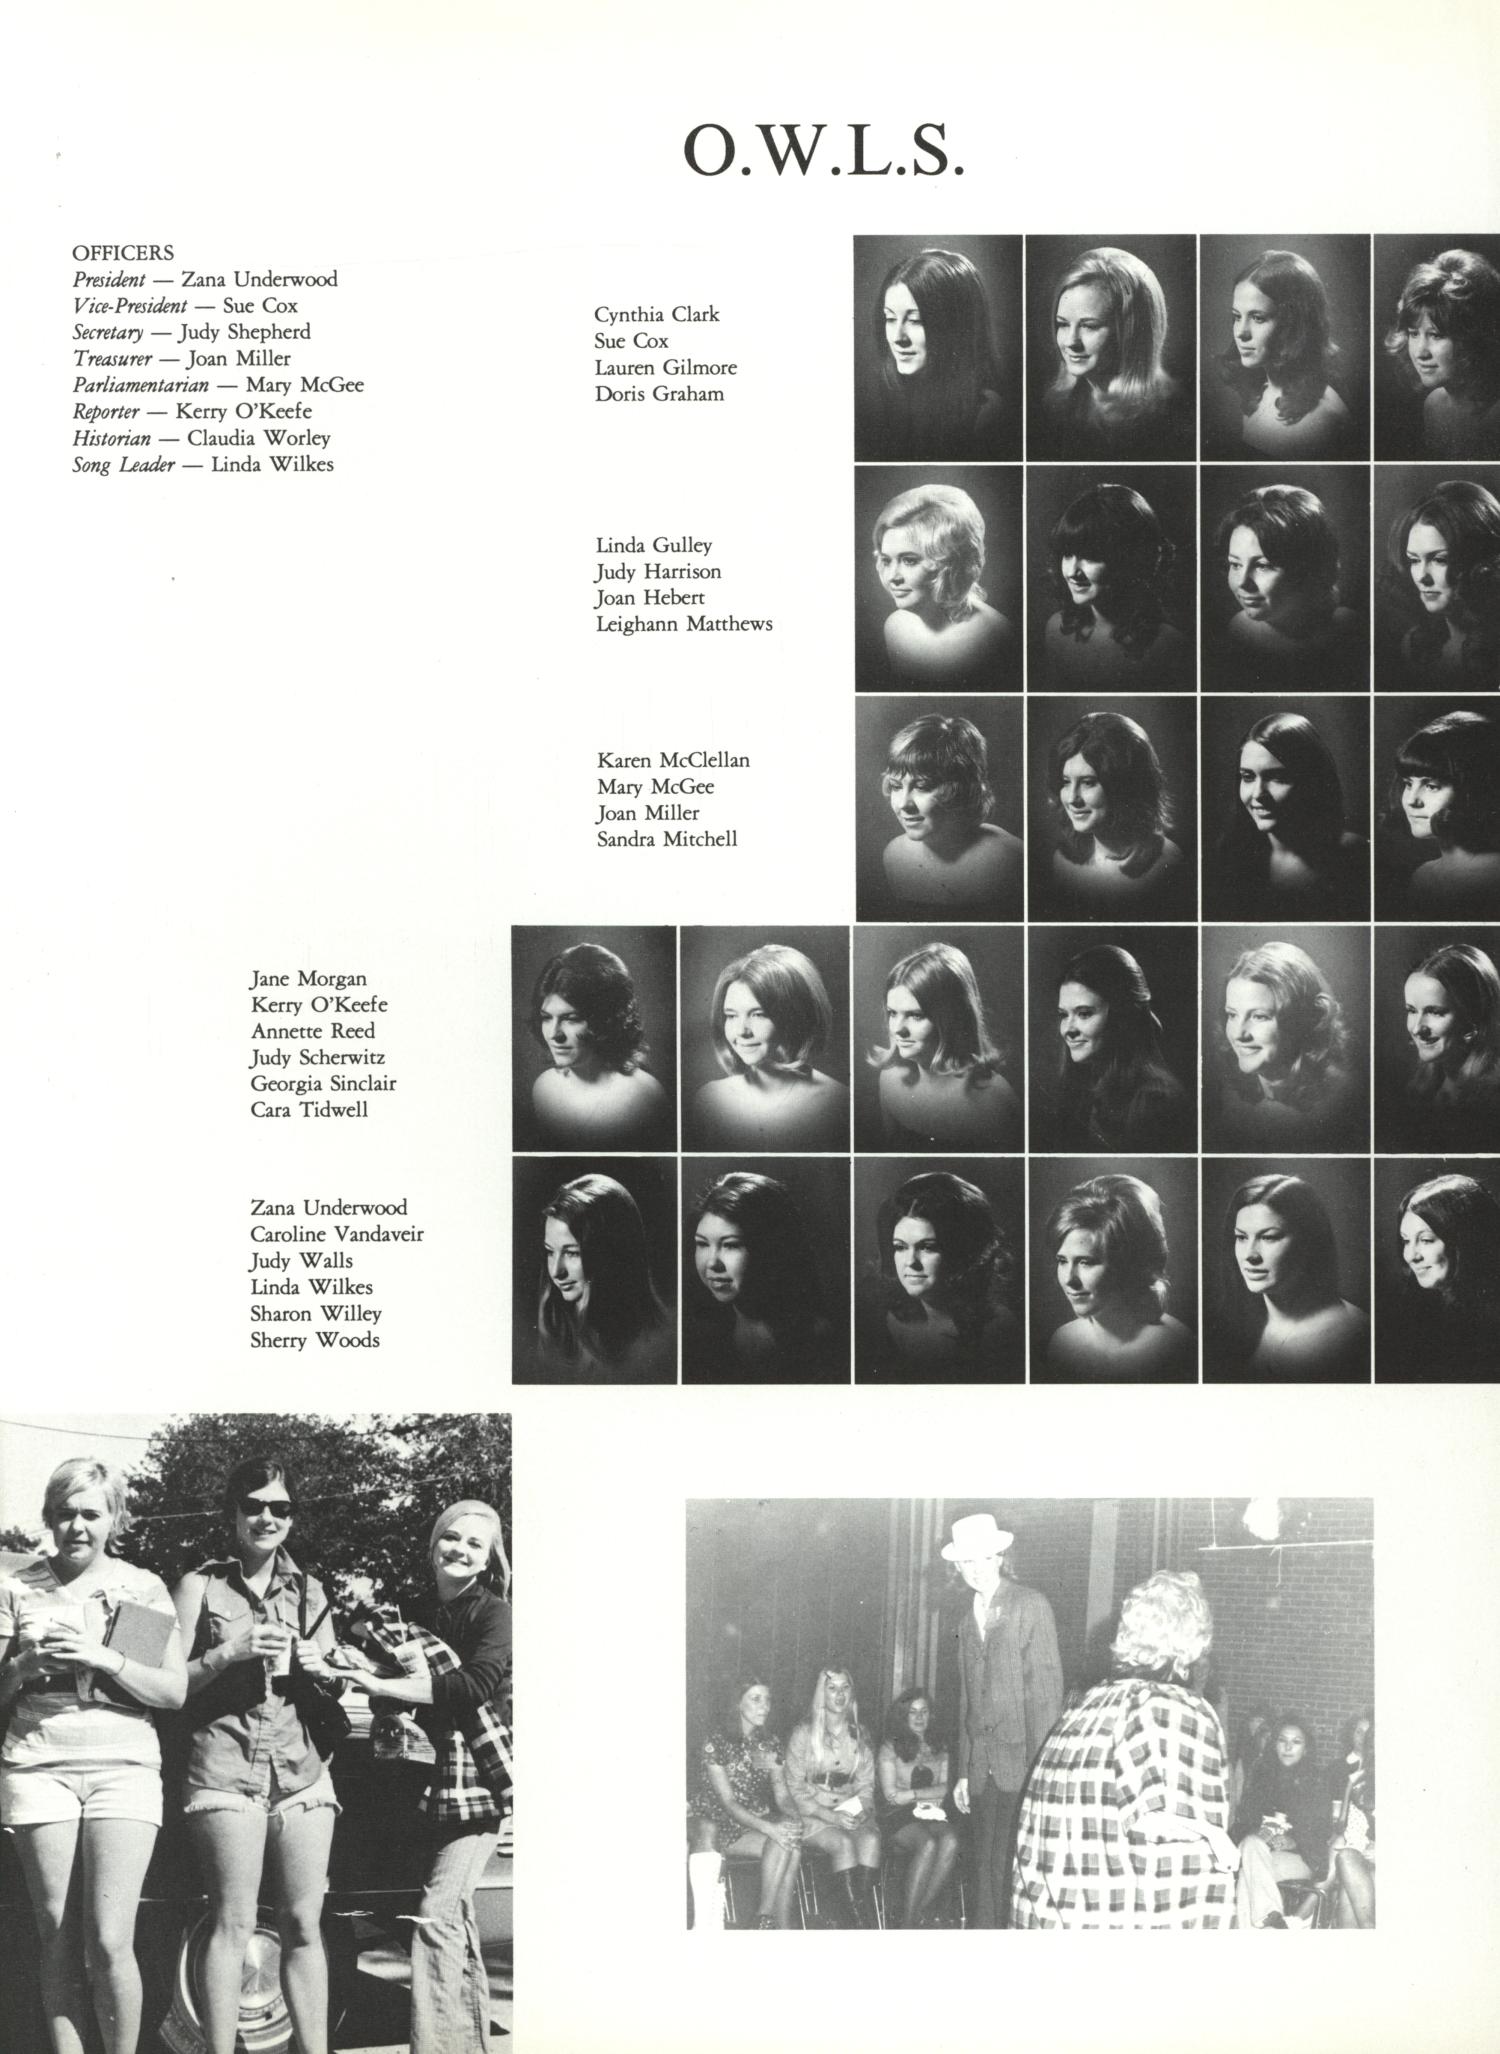 The Grassburr, Yearbook of Tarleton State College, 1972
                                                
                                                    86
                                                